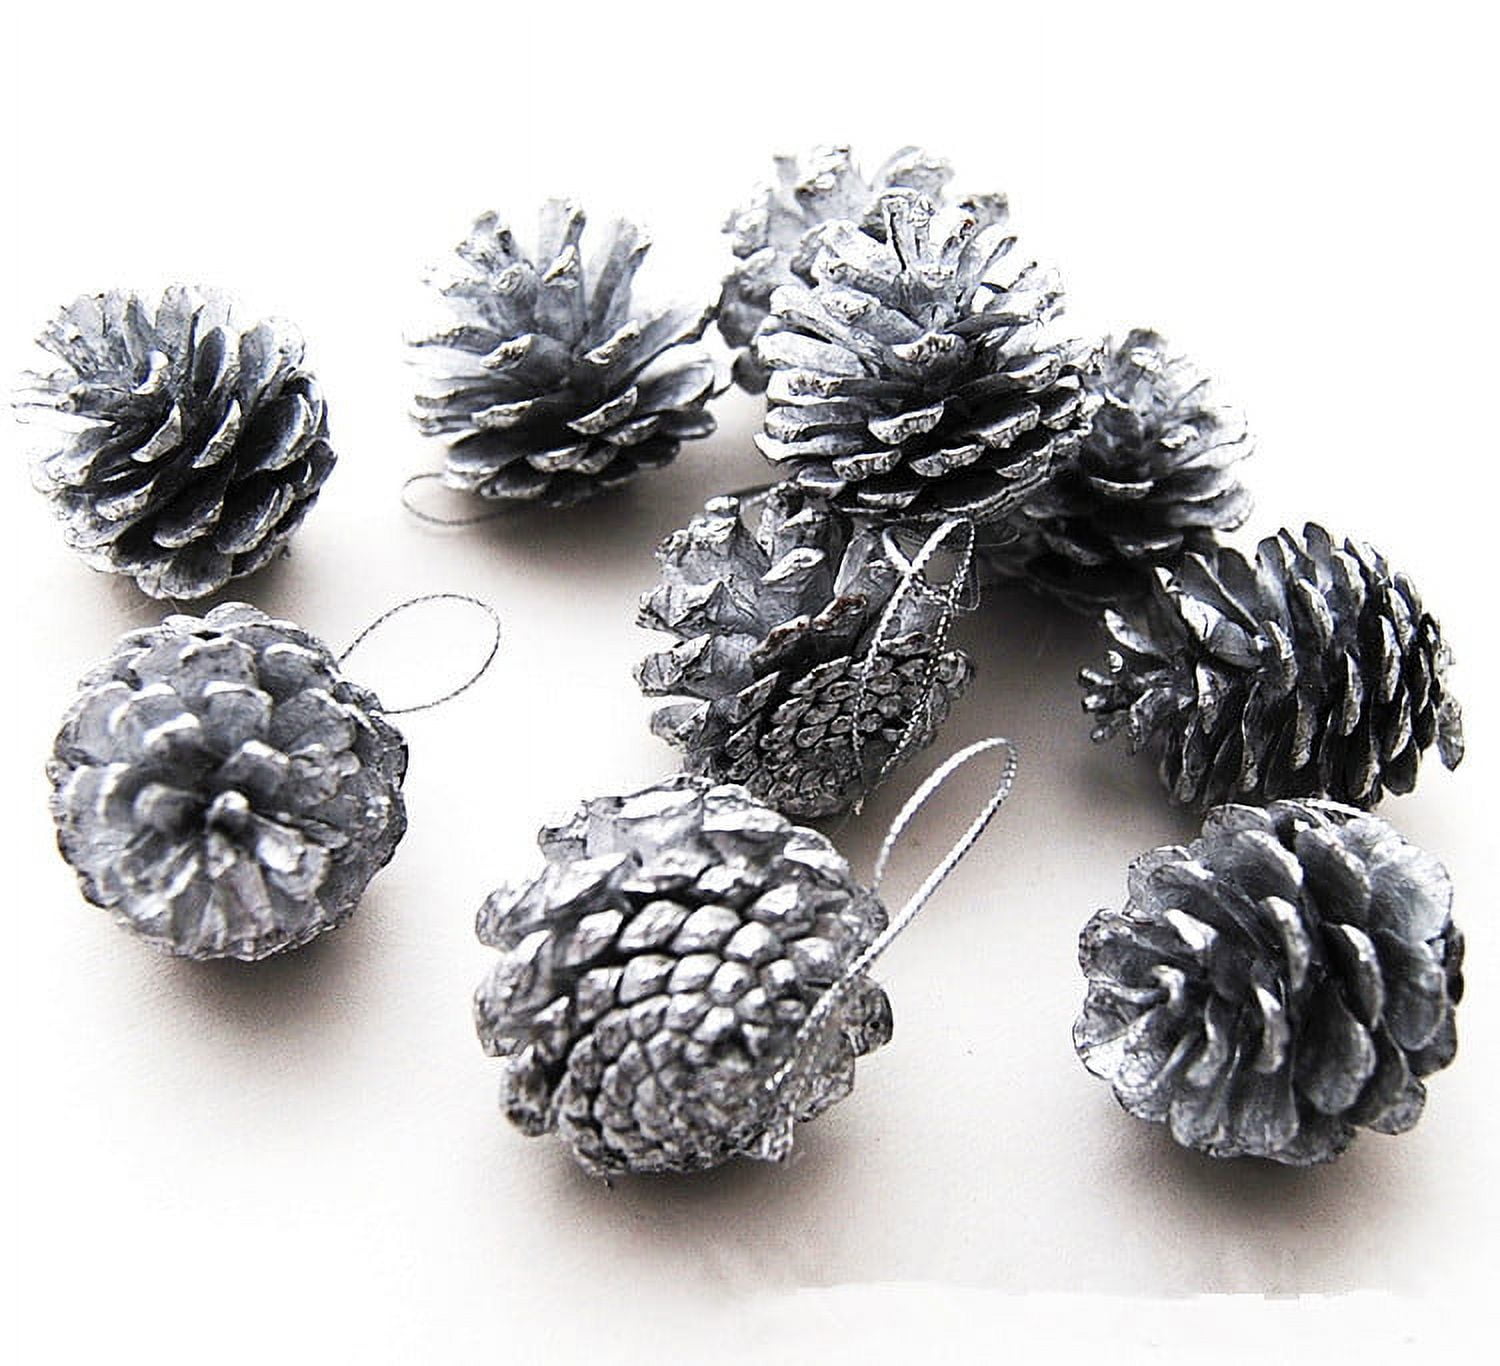 Yahpetes 6 Pcs Christmas Pine Cones 1.96 Snow Tipped Natural Pine Cones Wood Frosted Pine Cone Ornaments for Decorating and Designing (6 Pcs)